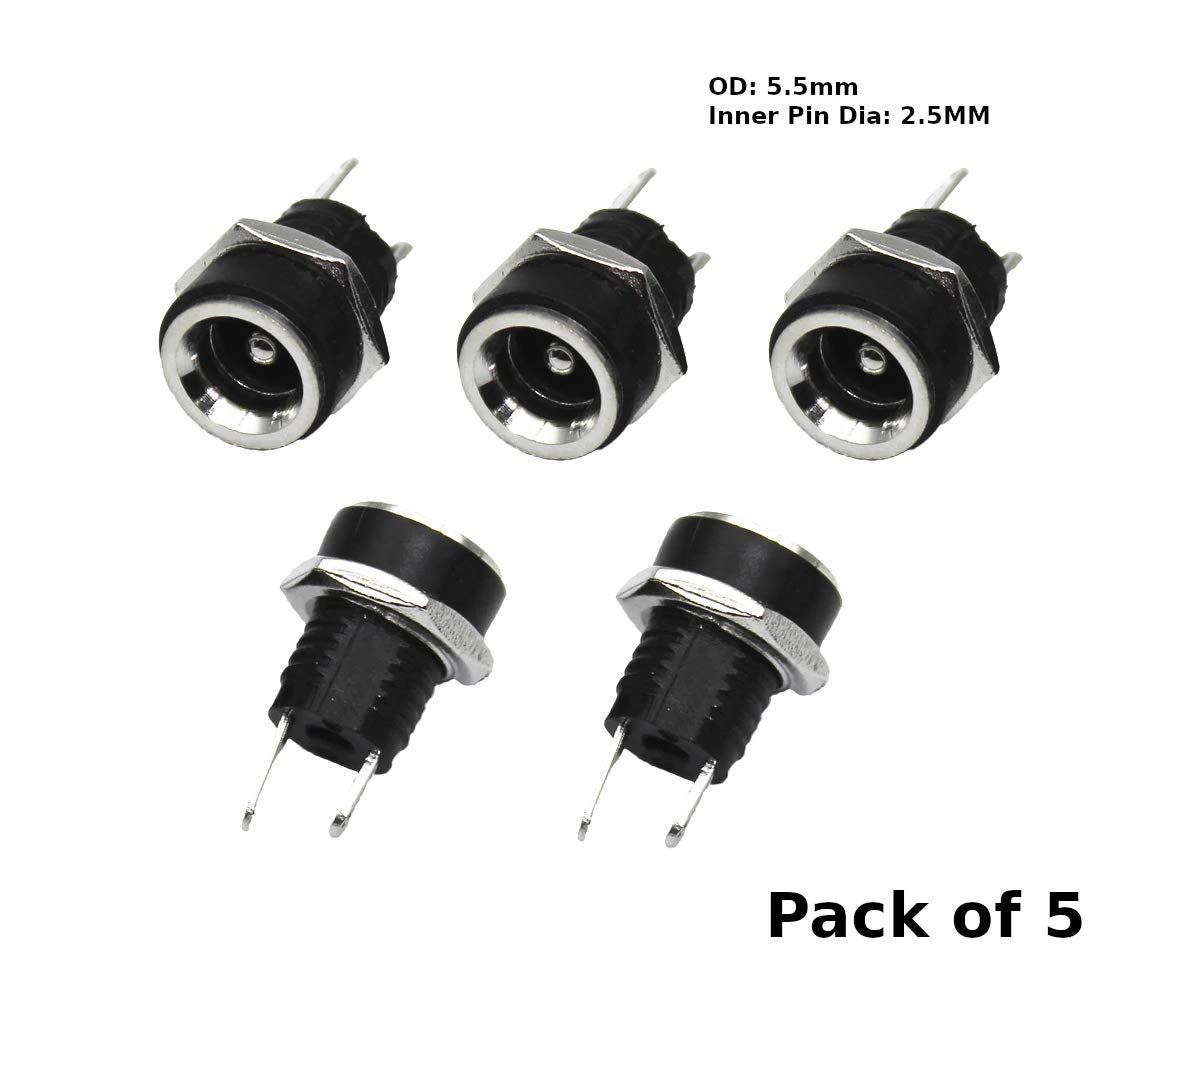 CentIoT - 5PCS DC Power Supply Jack Socket Female Connector - Round Panel Chasis Mount 12V 3A (2.5 x 5.5mm)